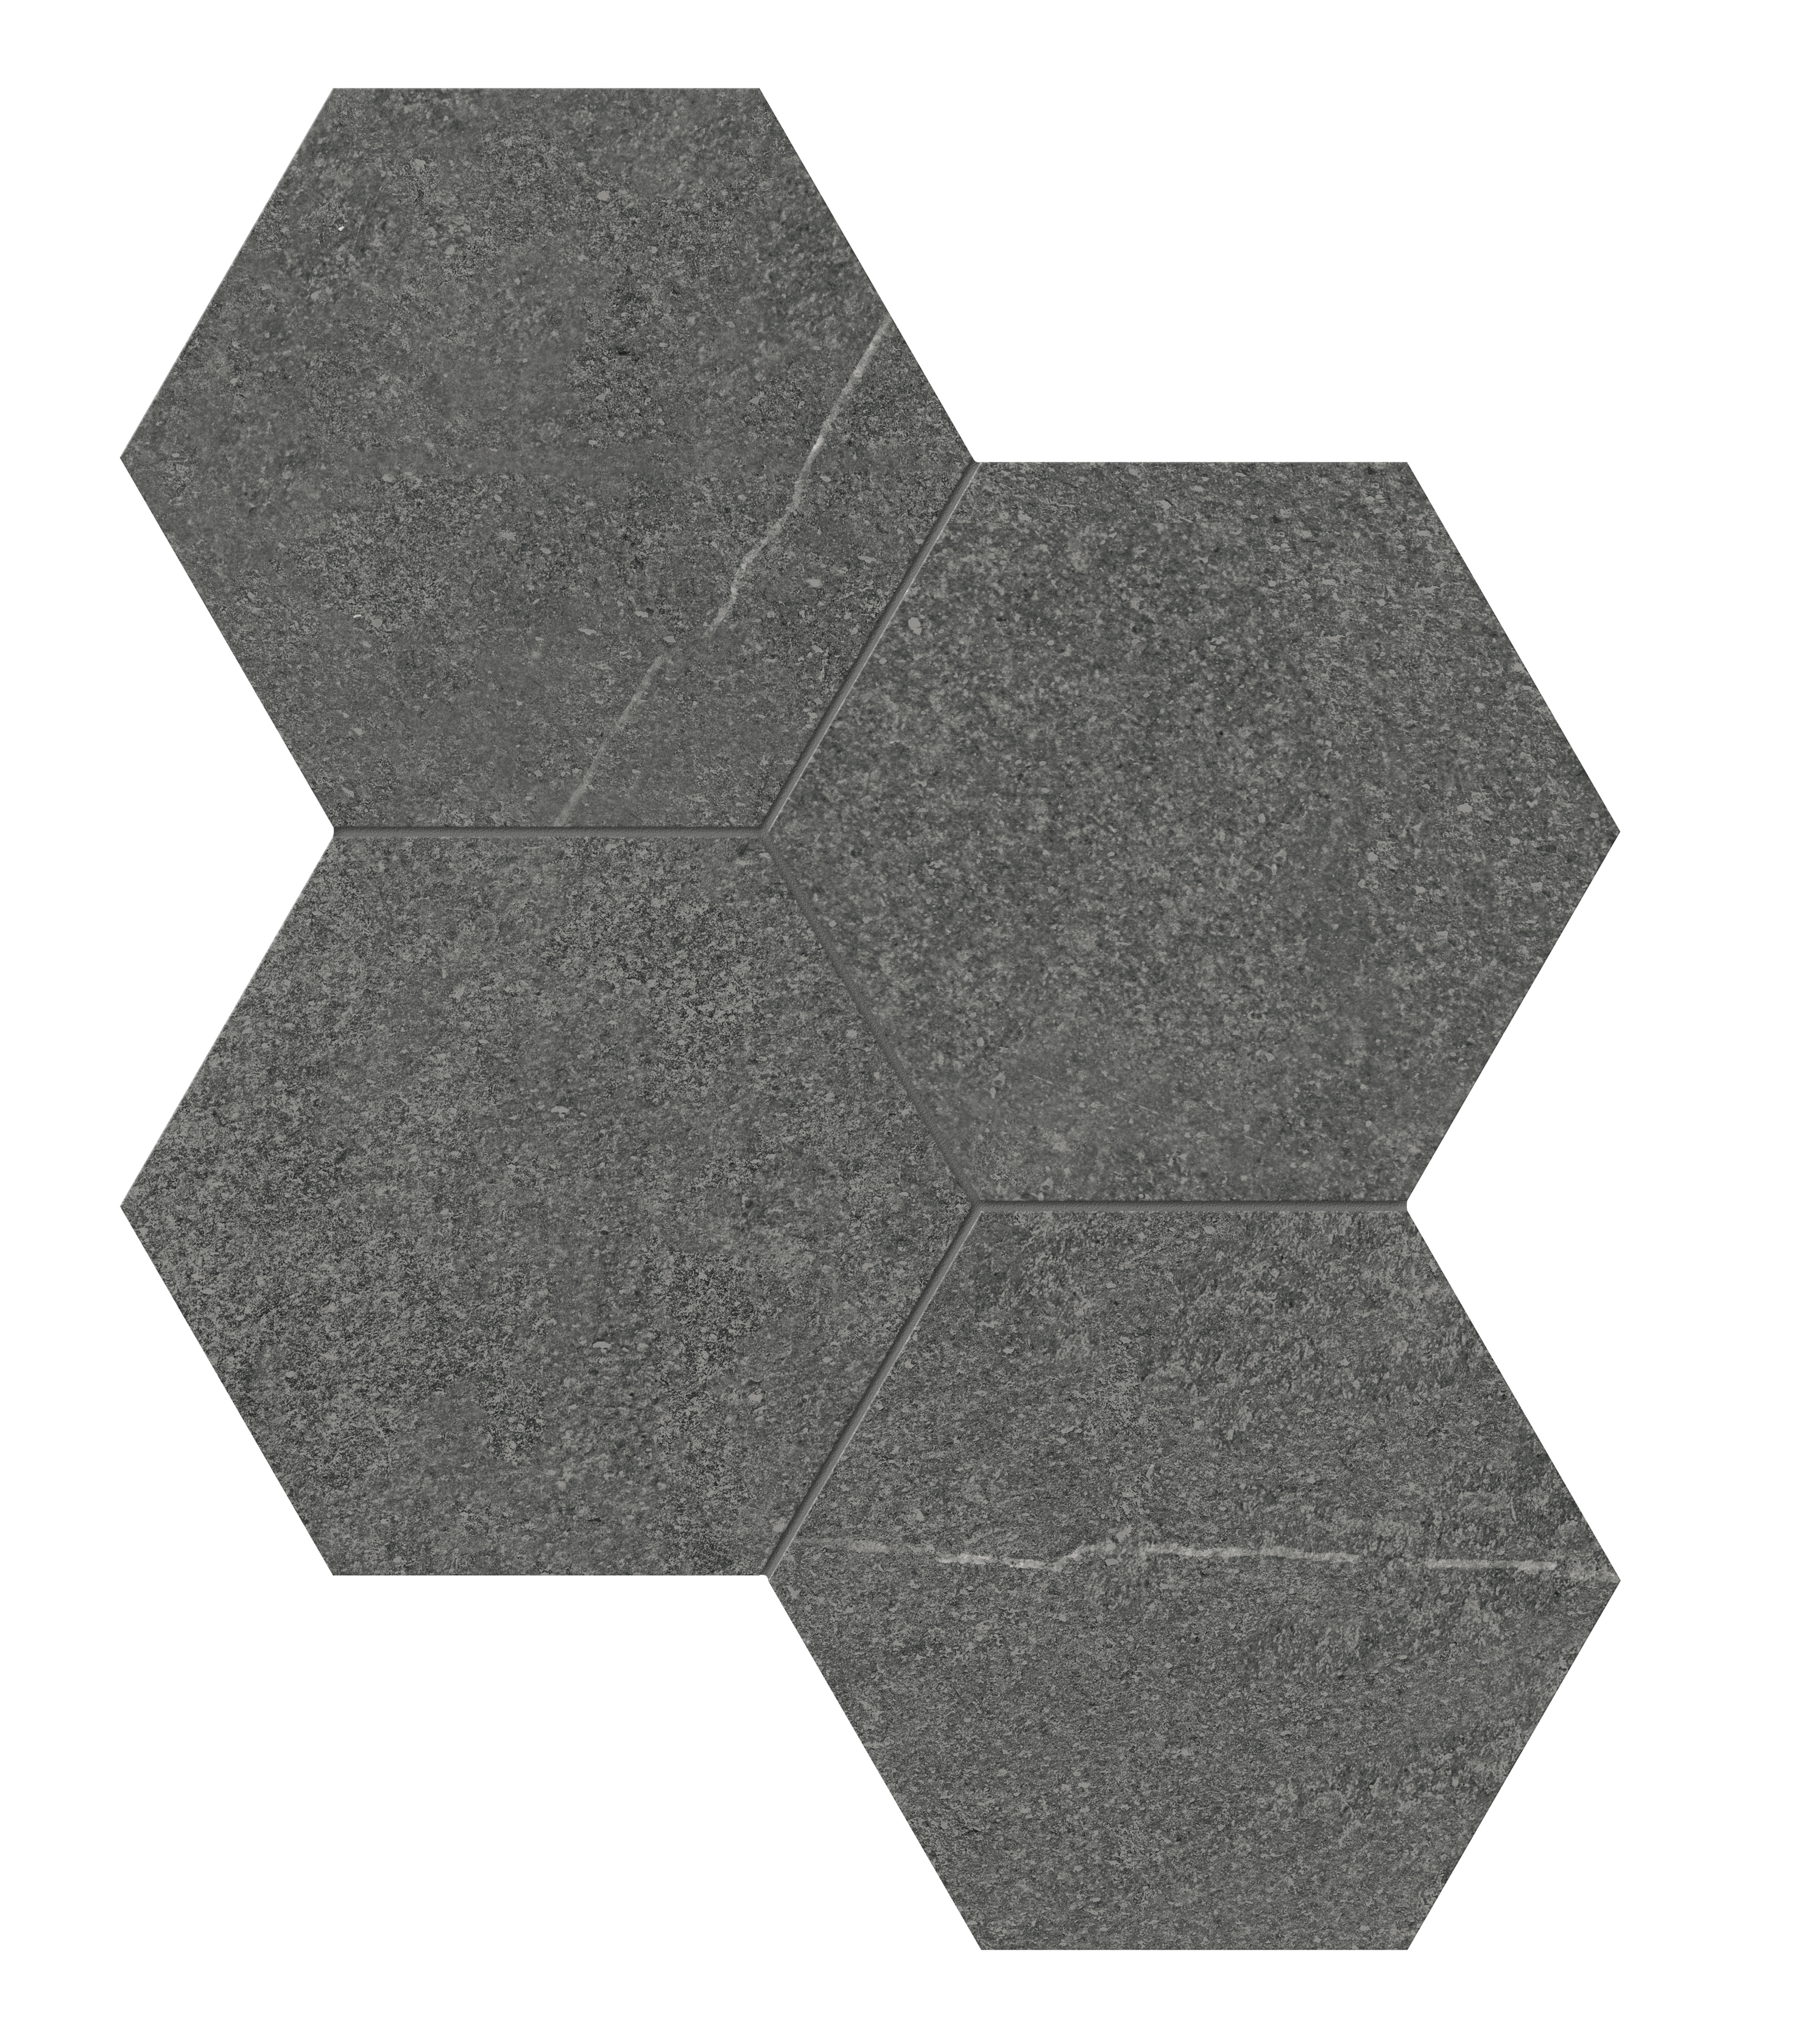 carbon hexagon 6-inch pattern color body porcelain mosaic from mjork anatolia collection distributed by surface group international matte finish straight edge edge mesh shape